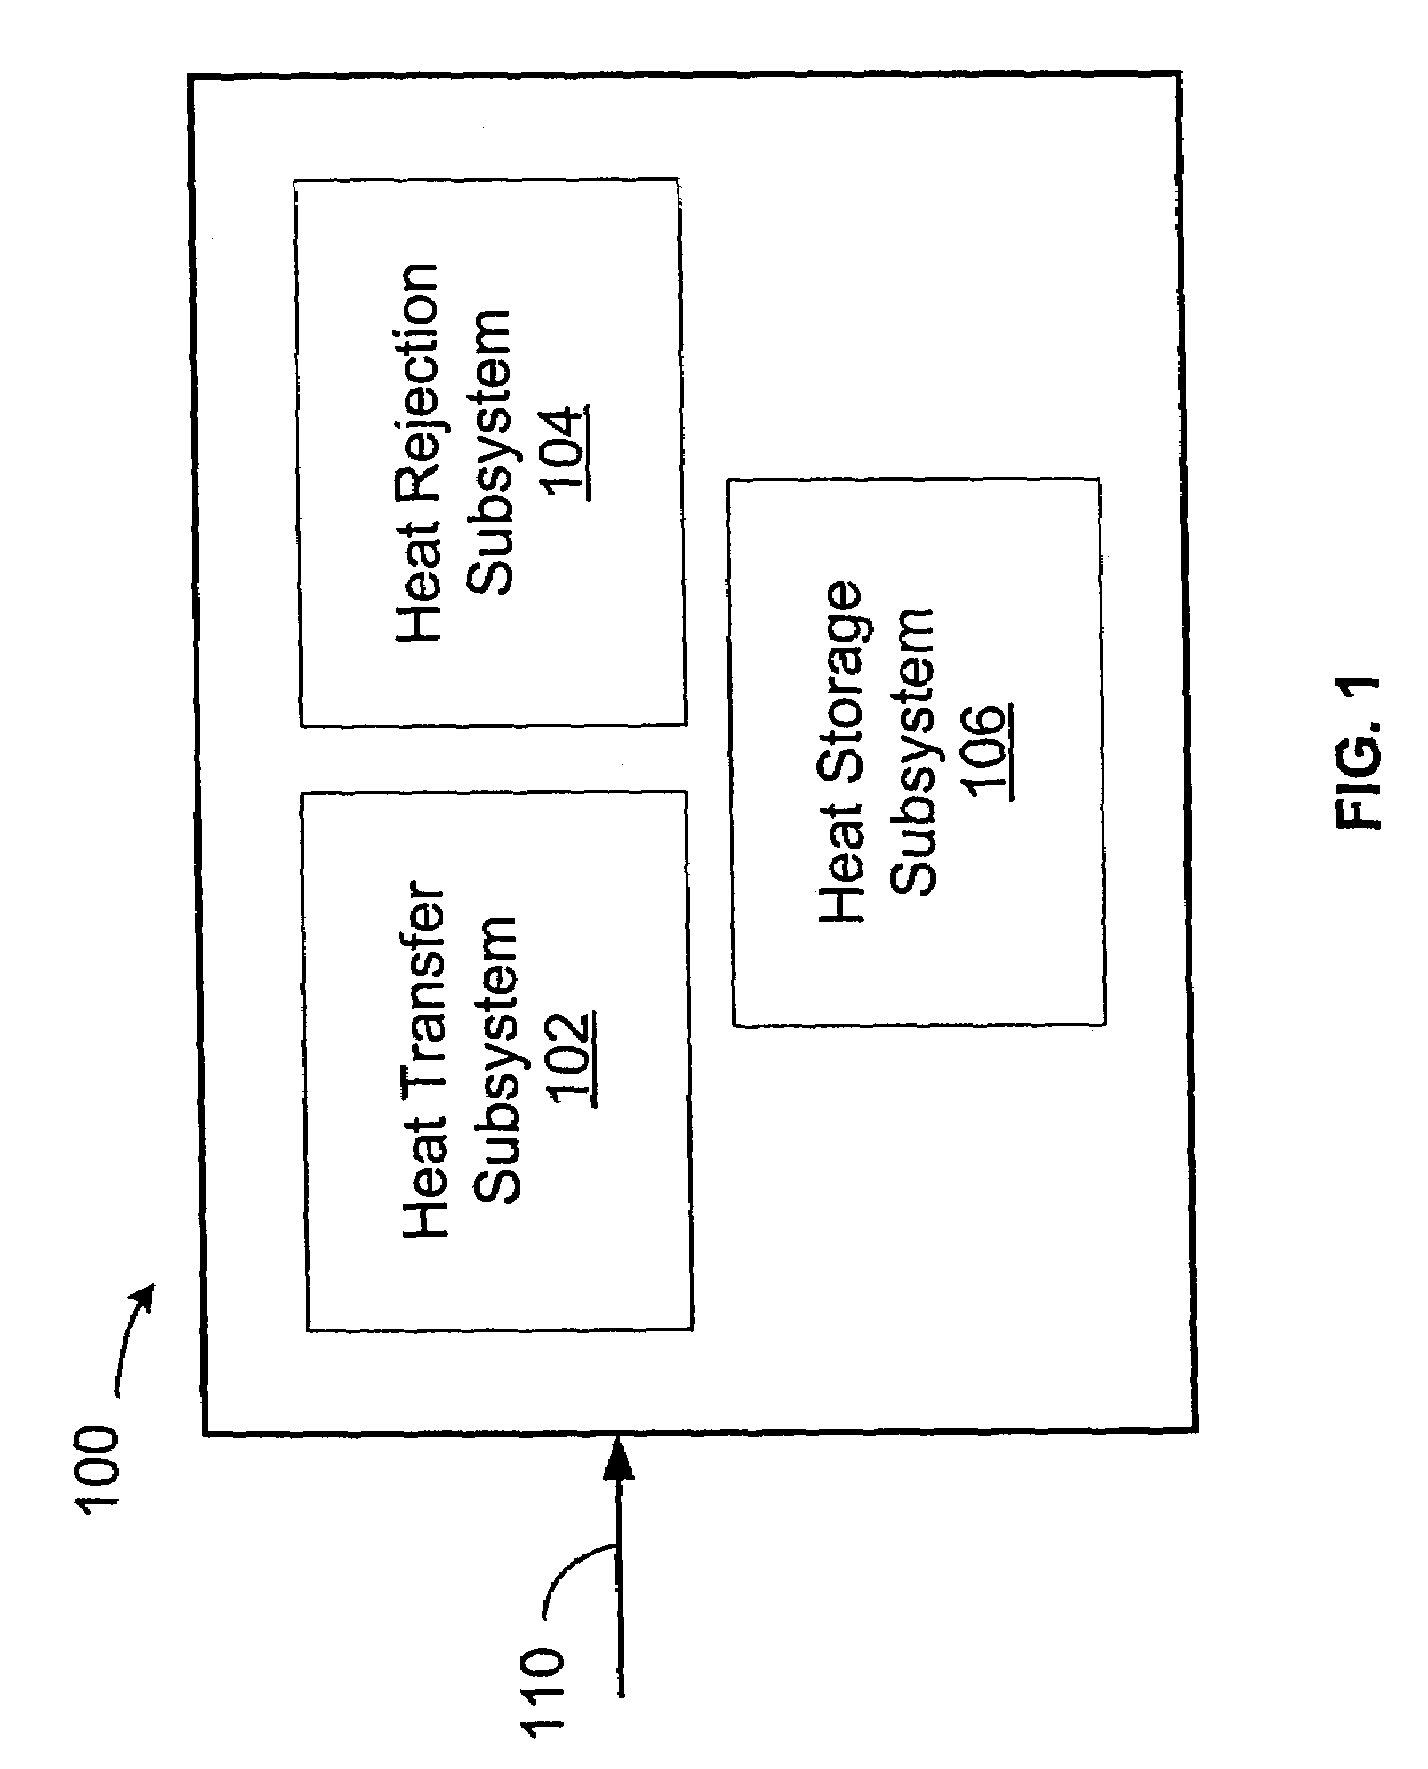 Phase-change heat reservoir device for transient thermal management